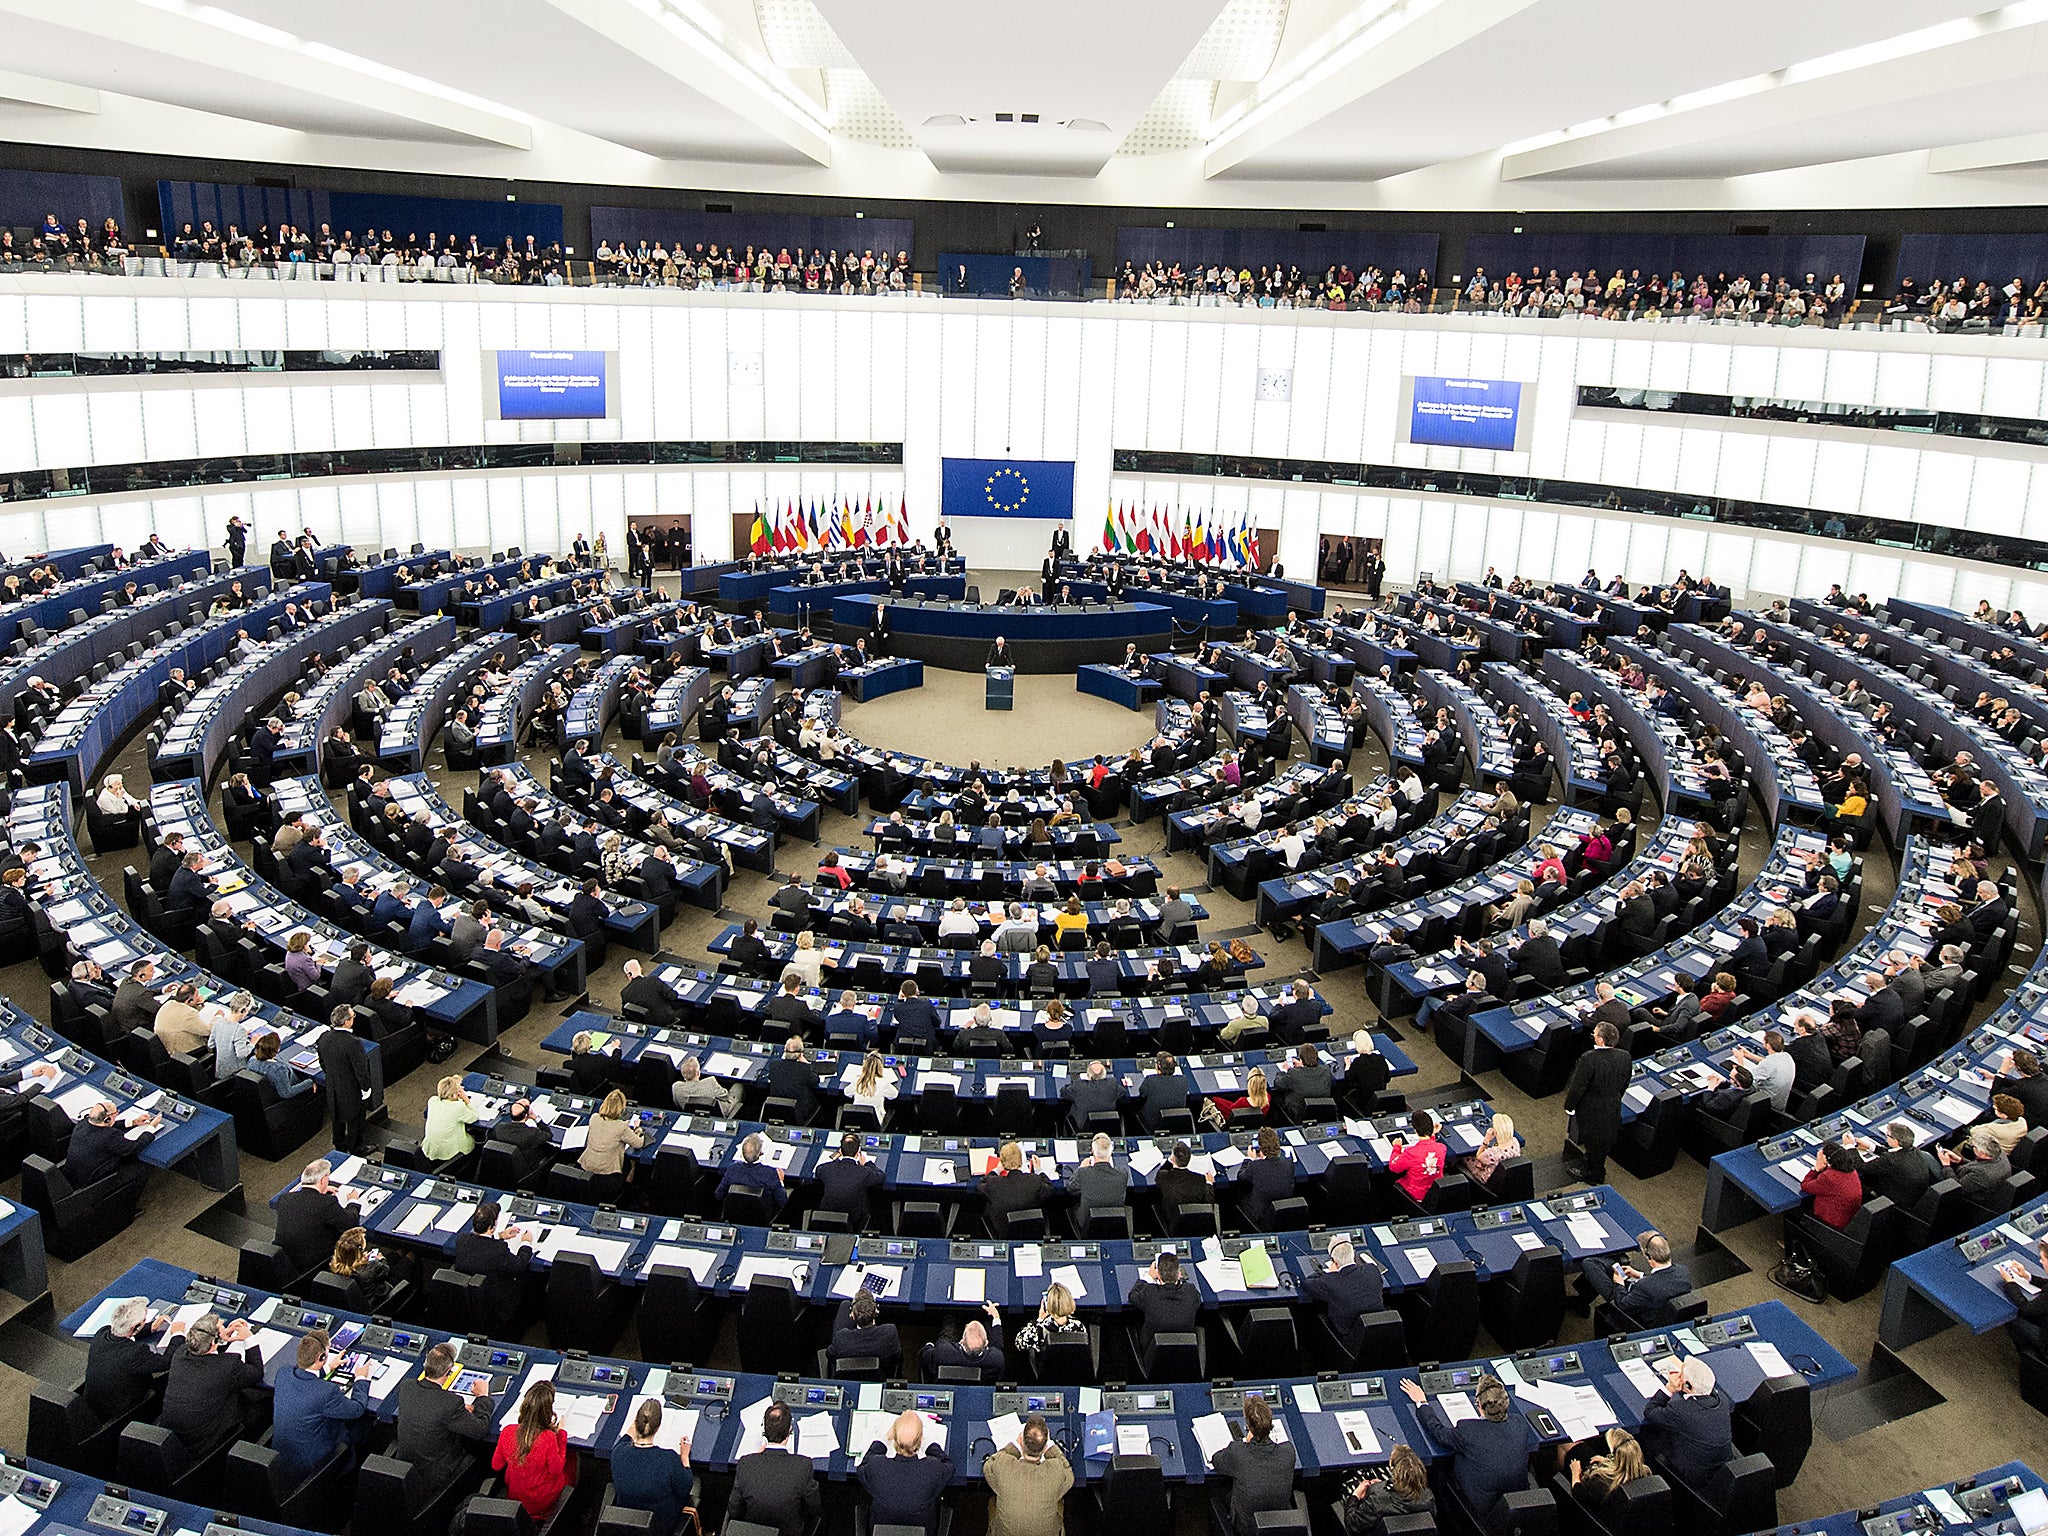 The European Parliament chamber in Strasbourg